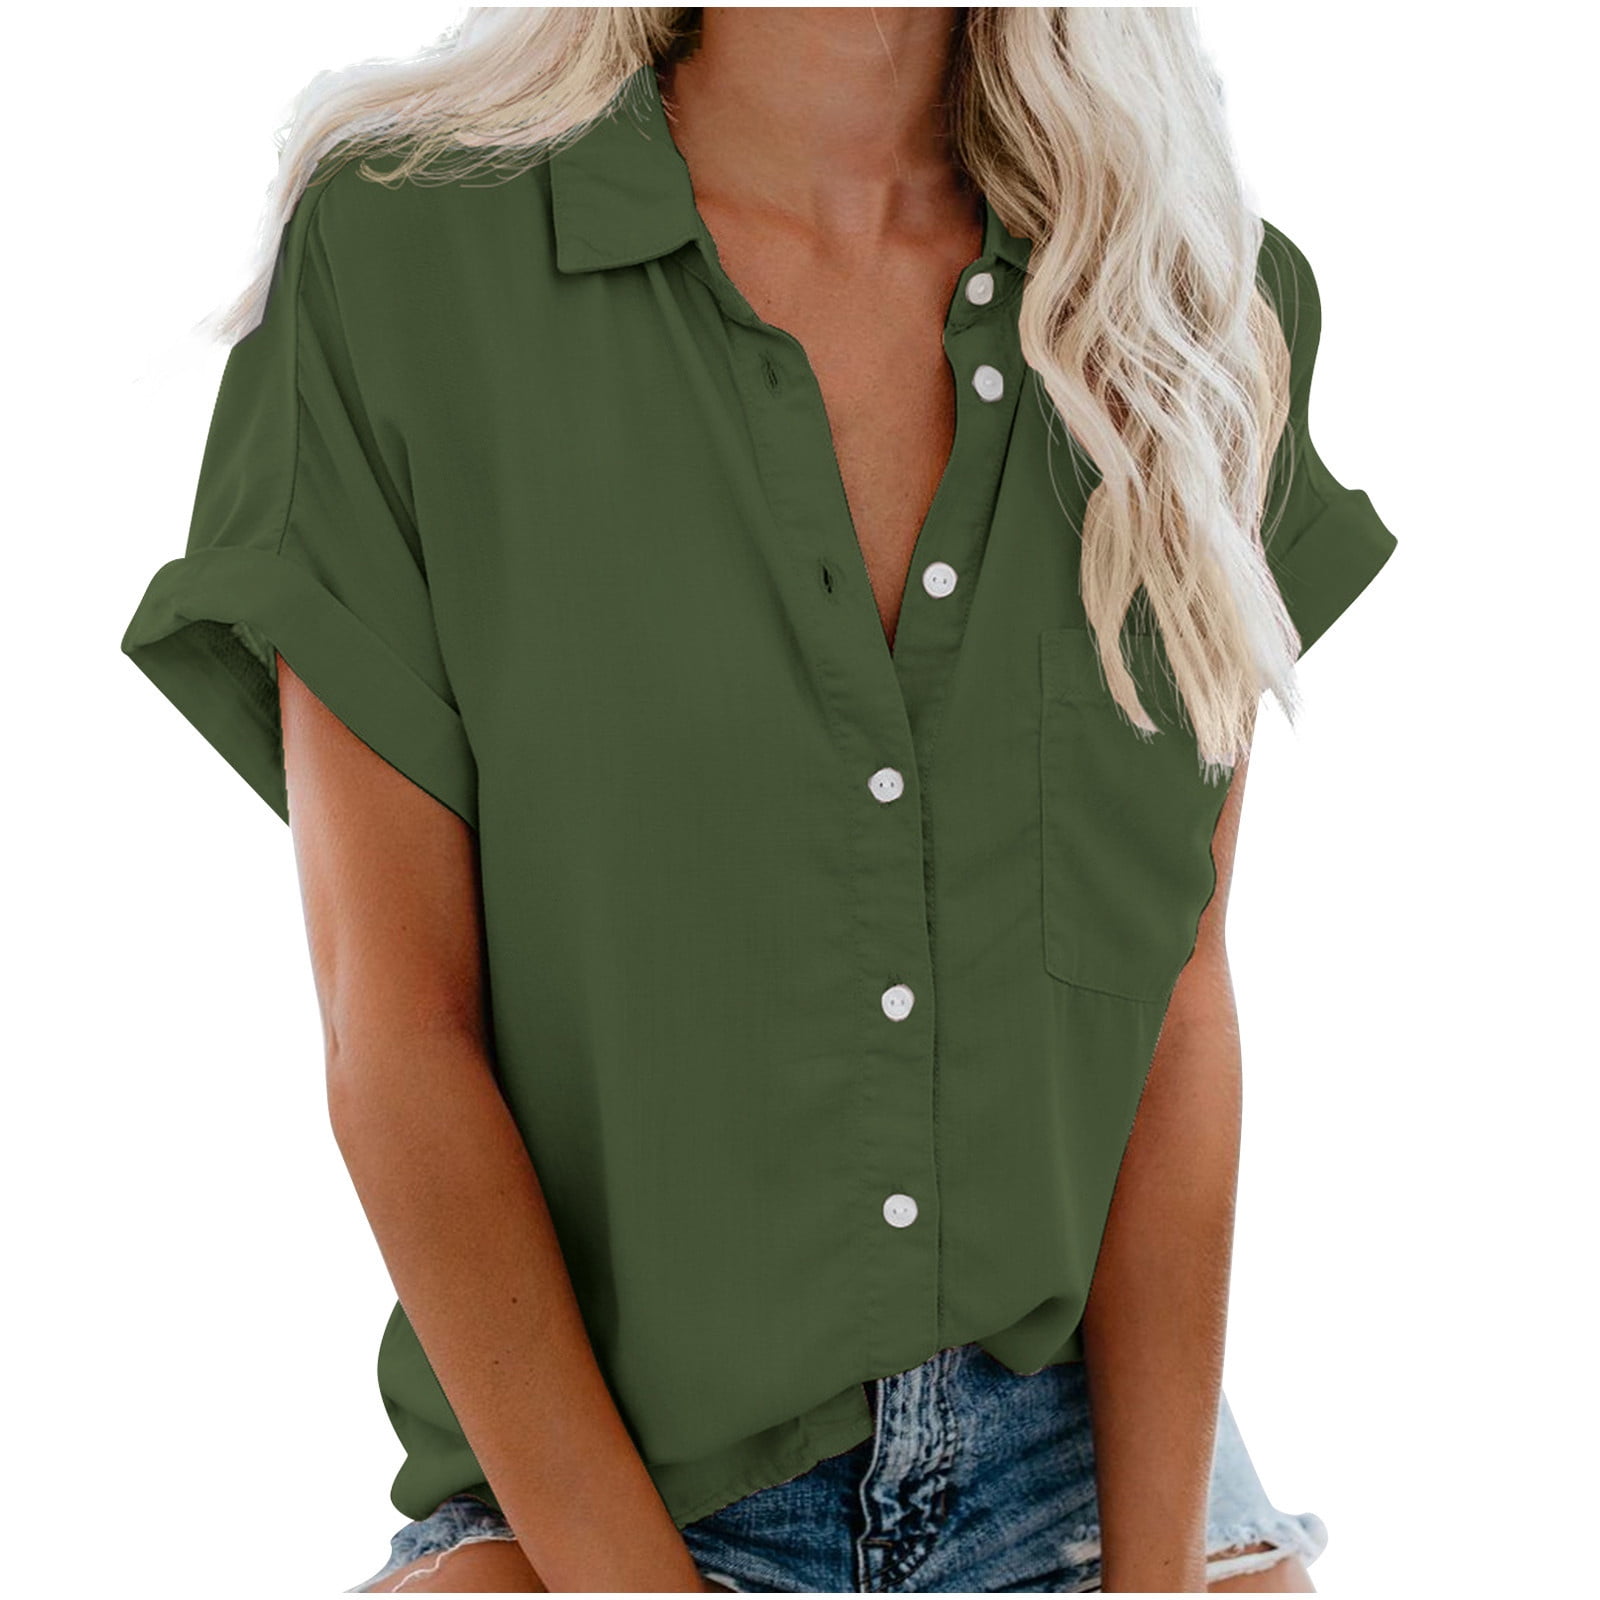 uhnmki Womens Button Up Shirt Spring Autumn Print Casual Comfort Flowy  Style Button Down Lapel Long Tops for Women Plus Green at  Women's  Clothing store